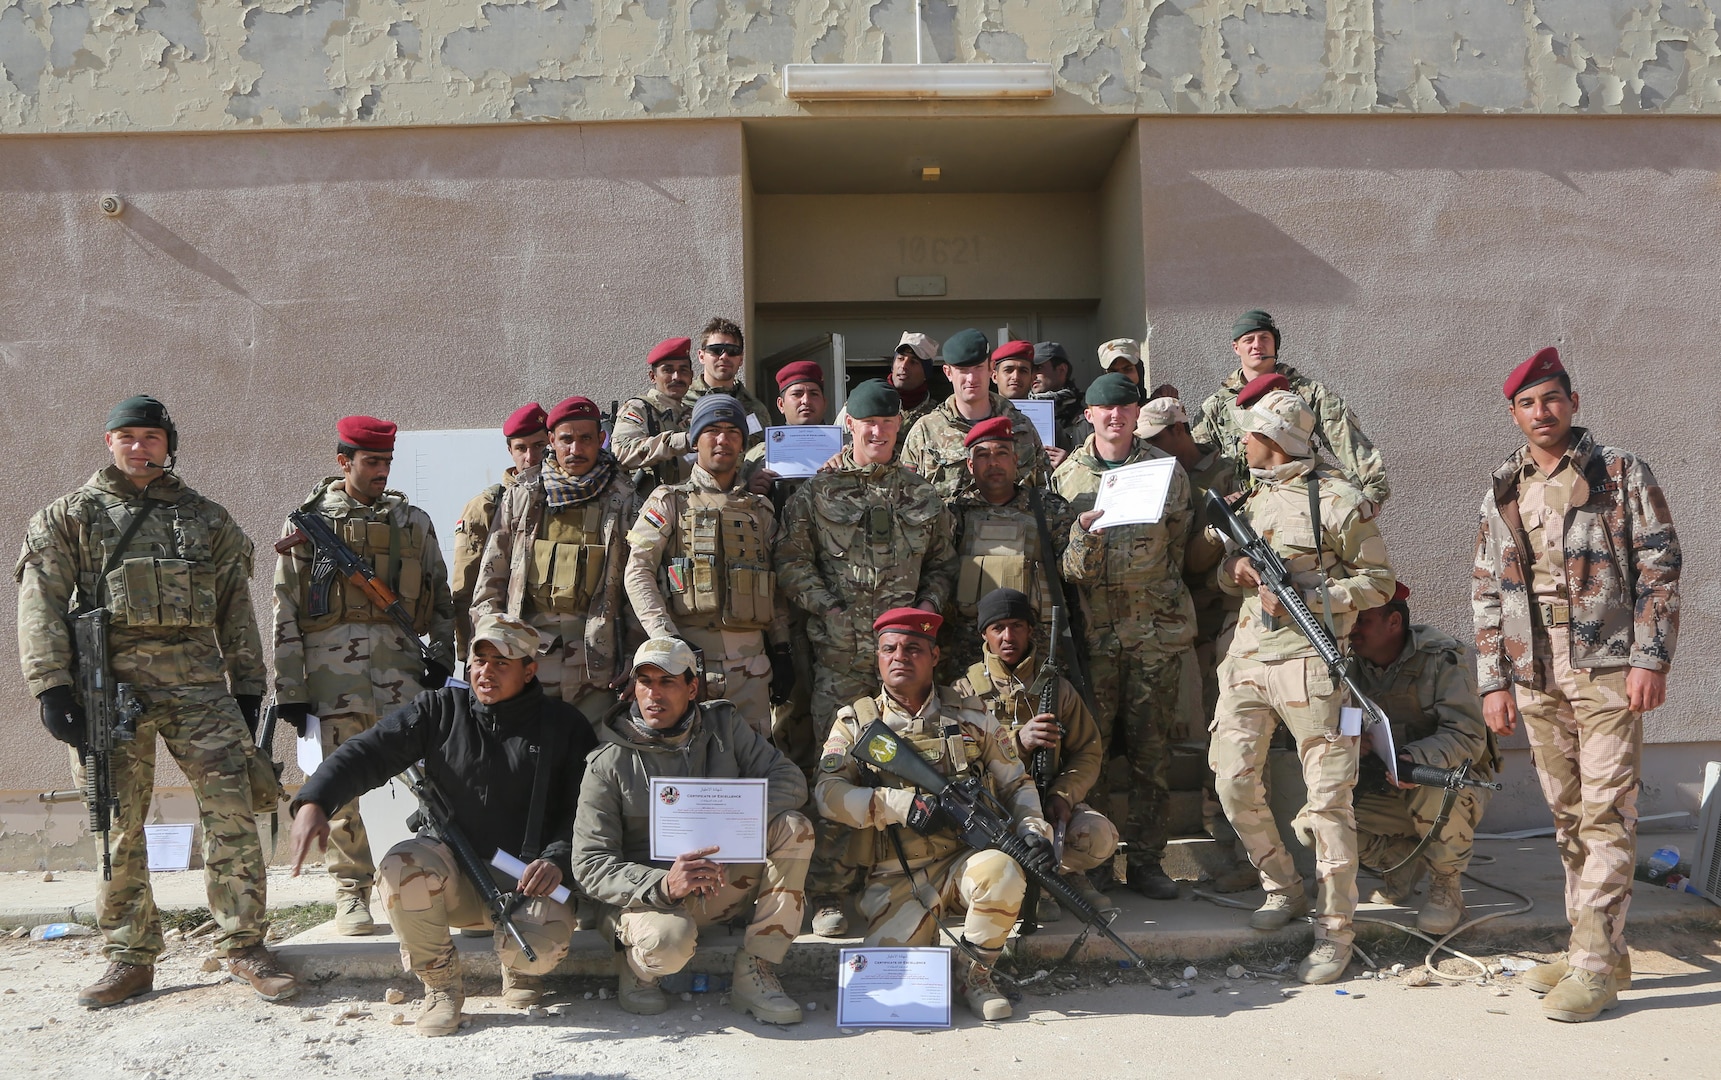 Iraqi soldiers from 7th Iraqi Army Division, British trainers from 4th Battalion, "The Rifles", and Danish trainers show off graduation certificates after the culminating exercise at Al Asad Air Base, Iraq, Jan. 15, 2017. Training at building partner capacity sites is an integral part of Combined Joint Task Force – Operation Inherent Resolve’s effort to train Iraqi security forces personnel. CJTF-OIR is the global Coalition to defeat ISIL in Iraq and Syria. (U.S. Army photo by Sgt. Lisa Soy)